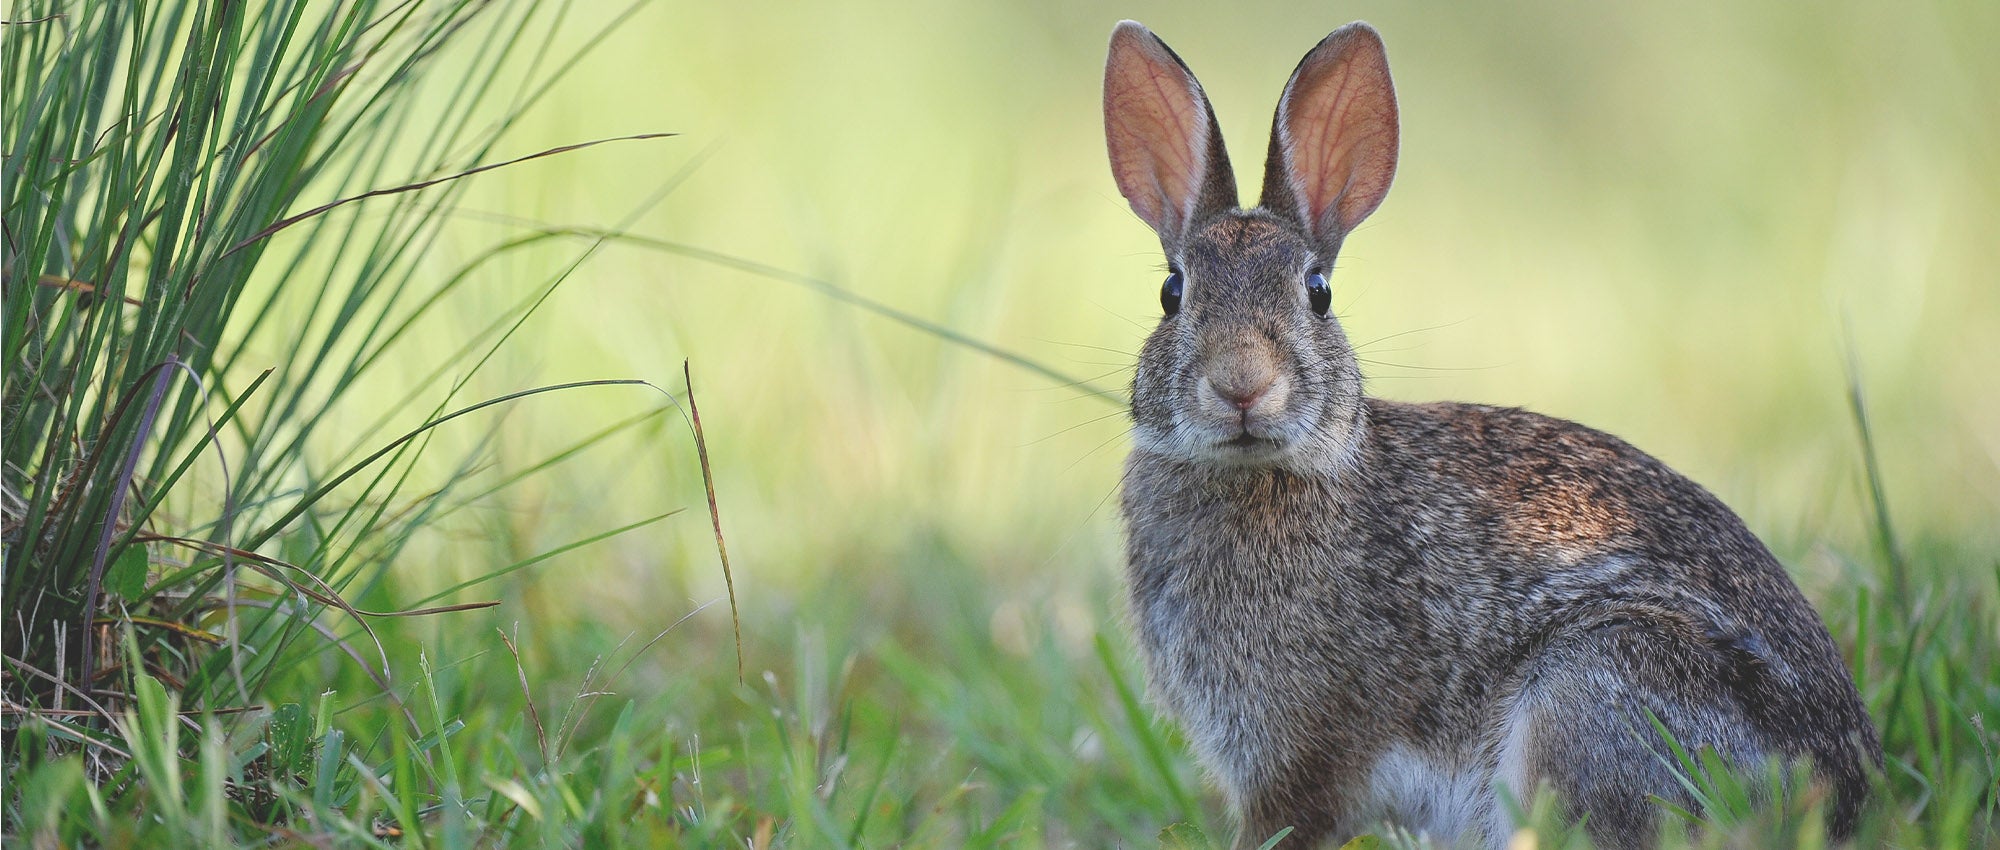 What to do about wild rabbits | The Humane Society of the United States